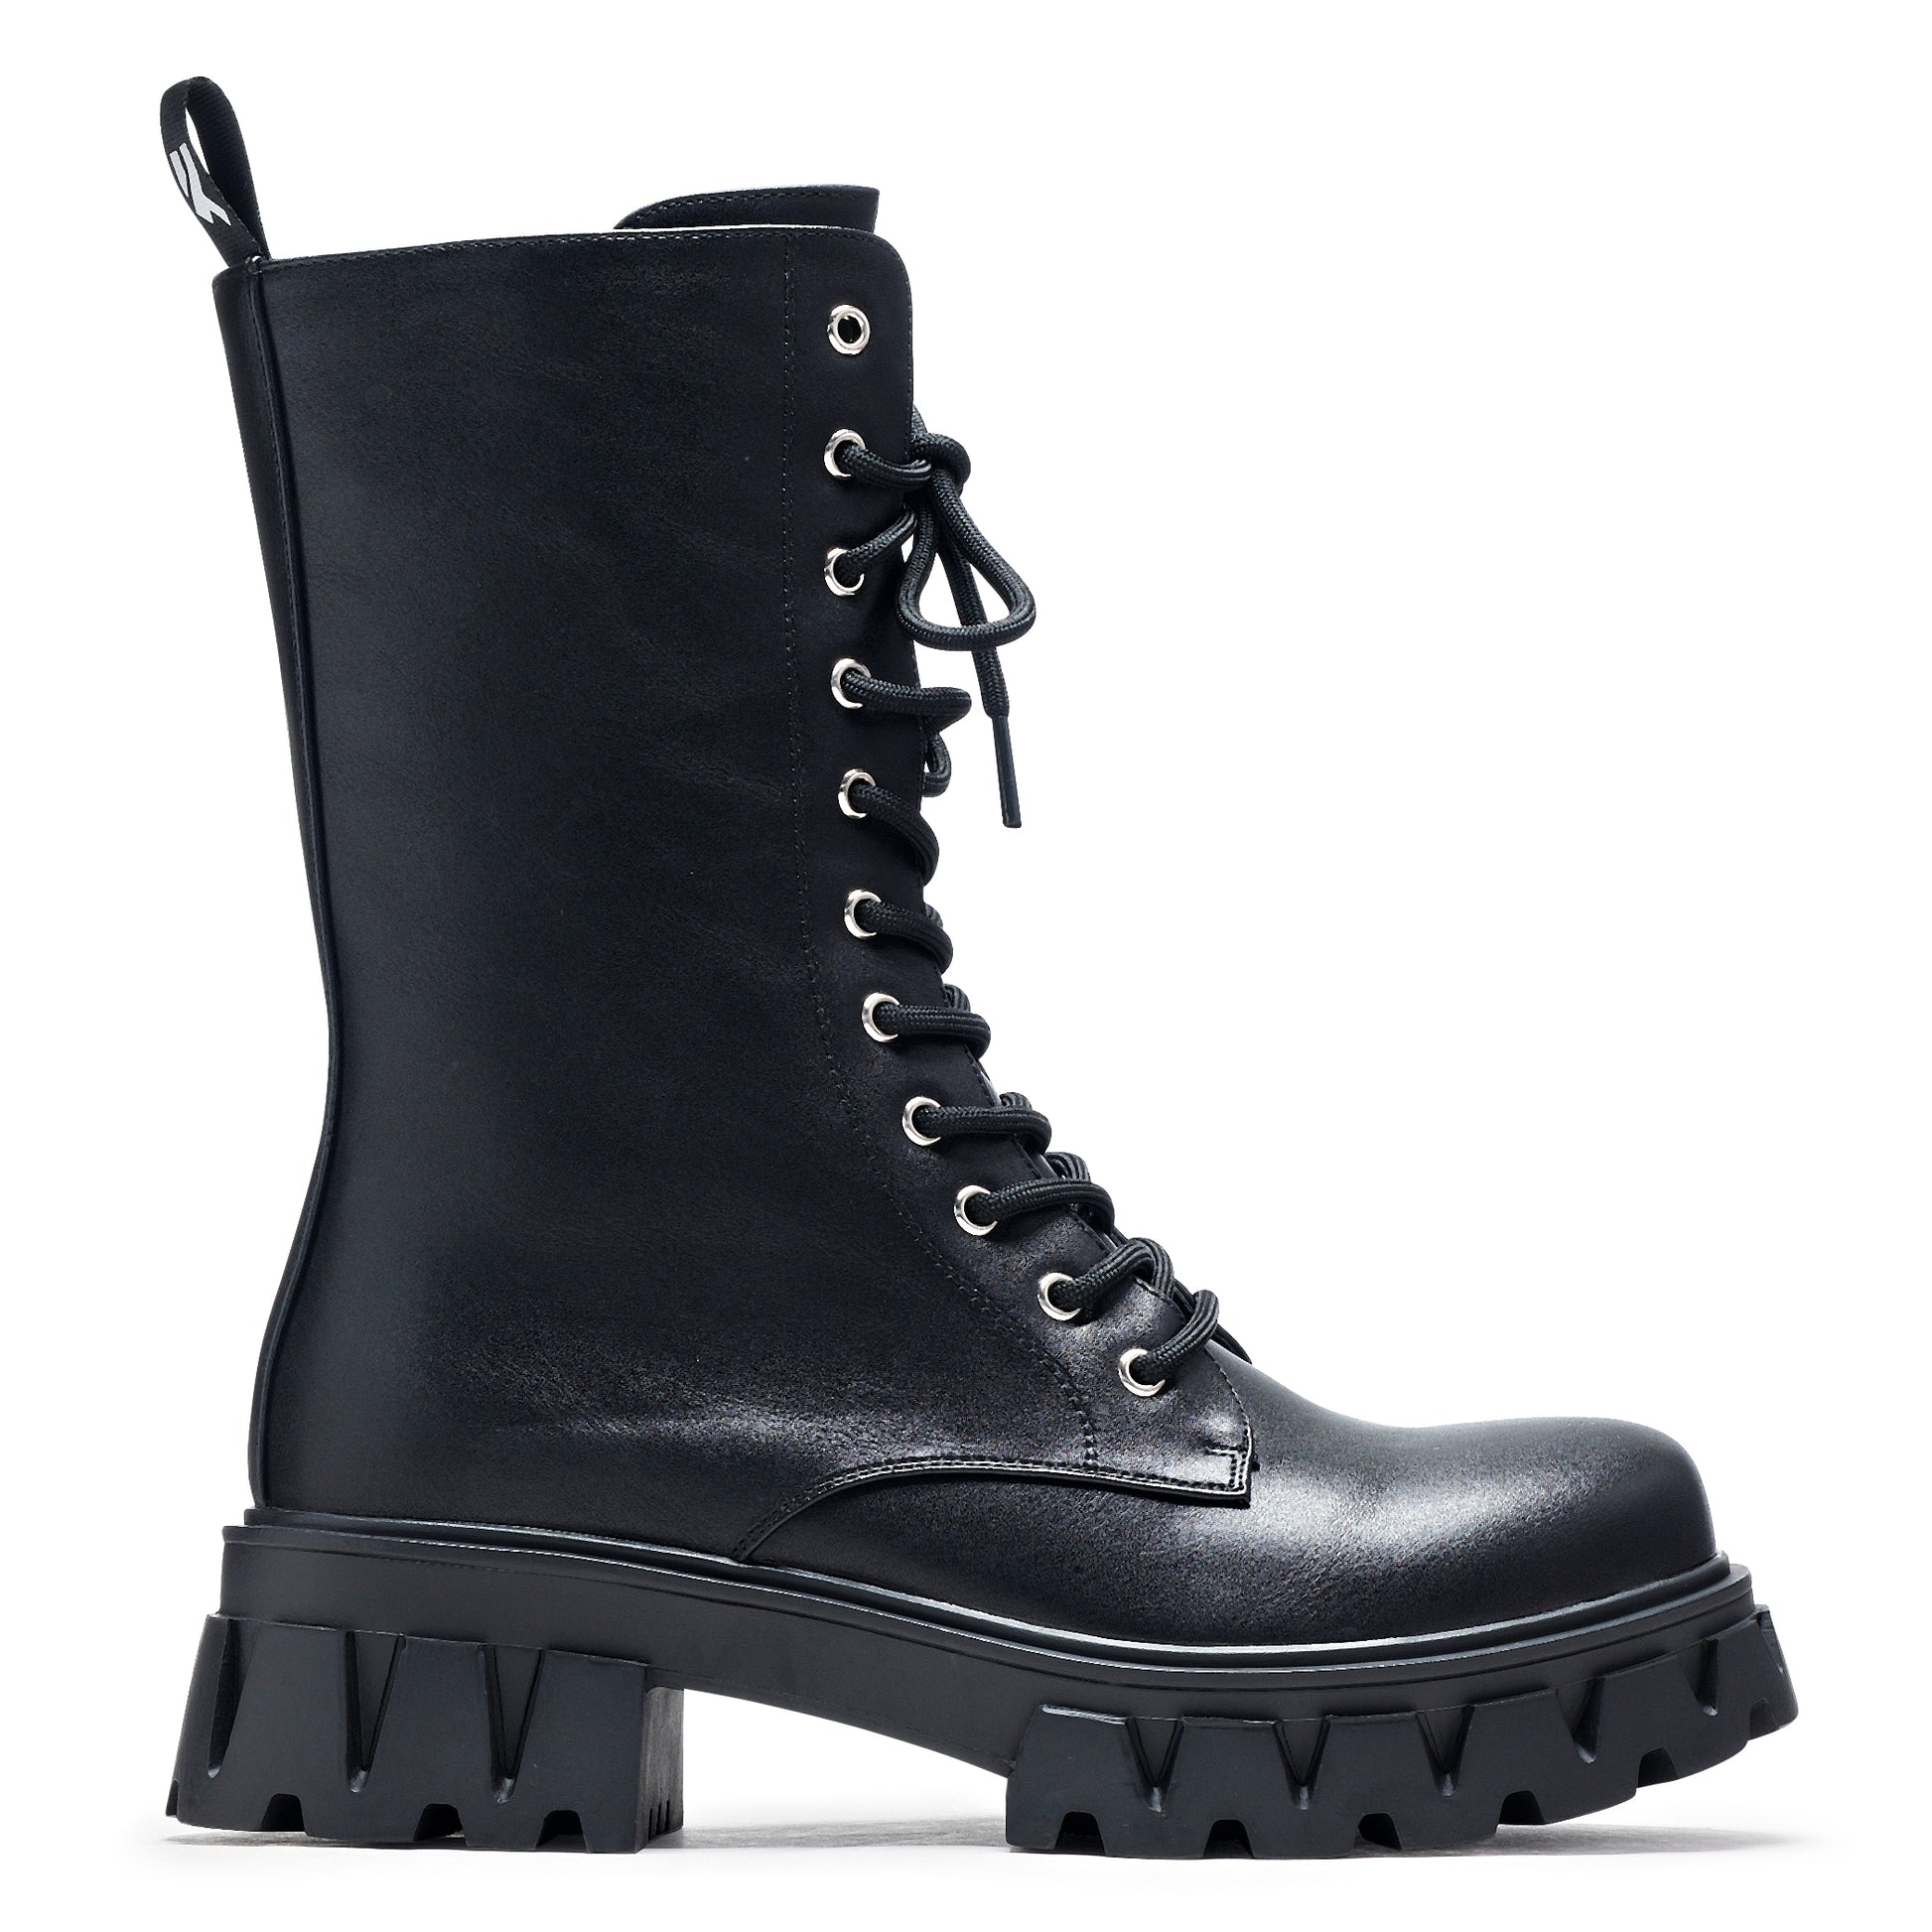 Siren Men's Tall Lace Up Boots - Black - Ankle Boots - KOI Footwear - Black - Side View